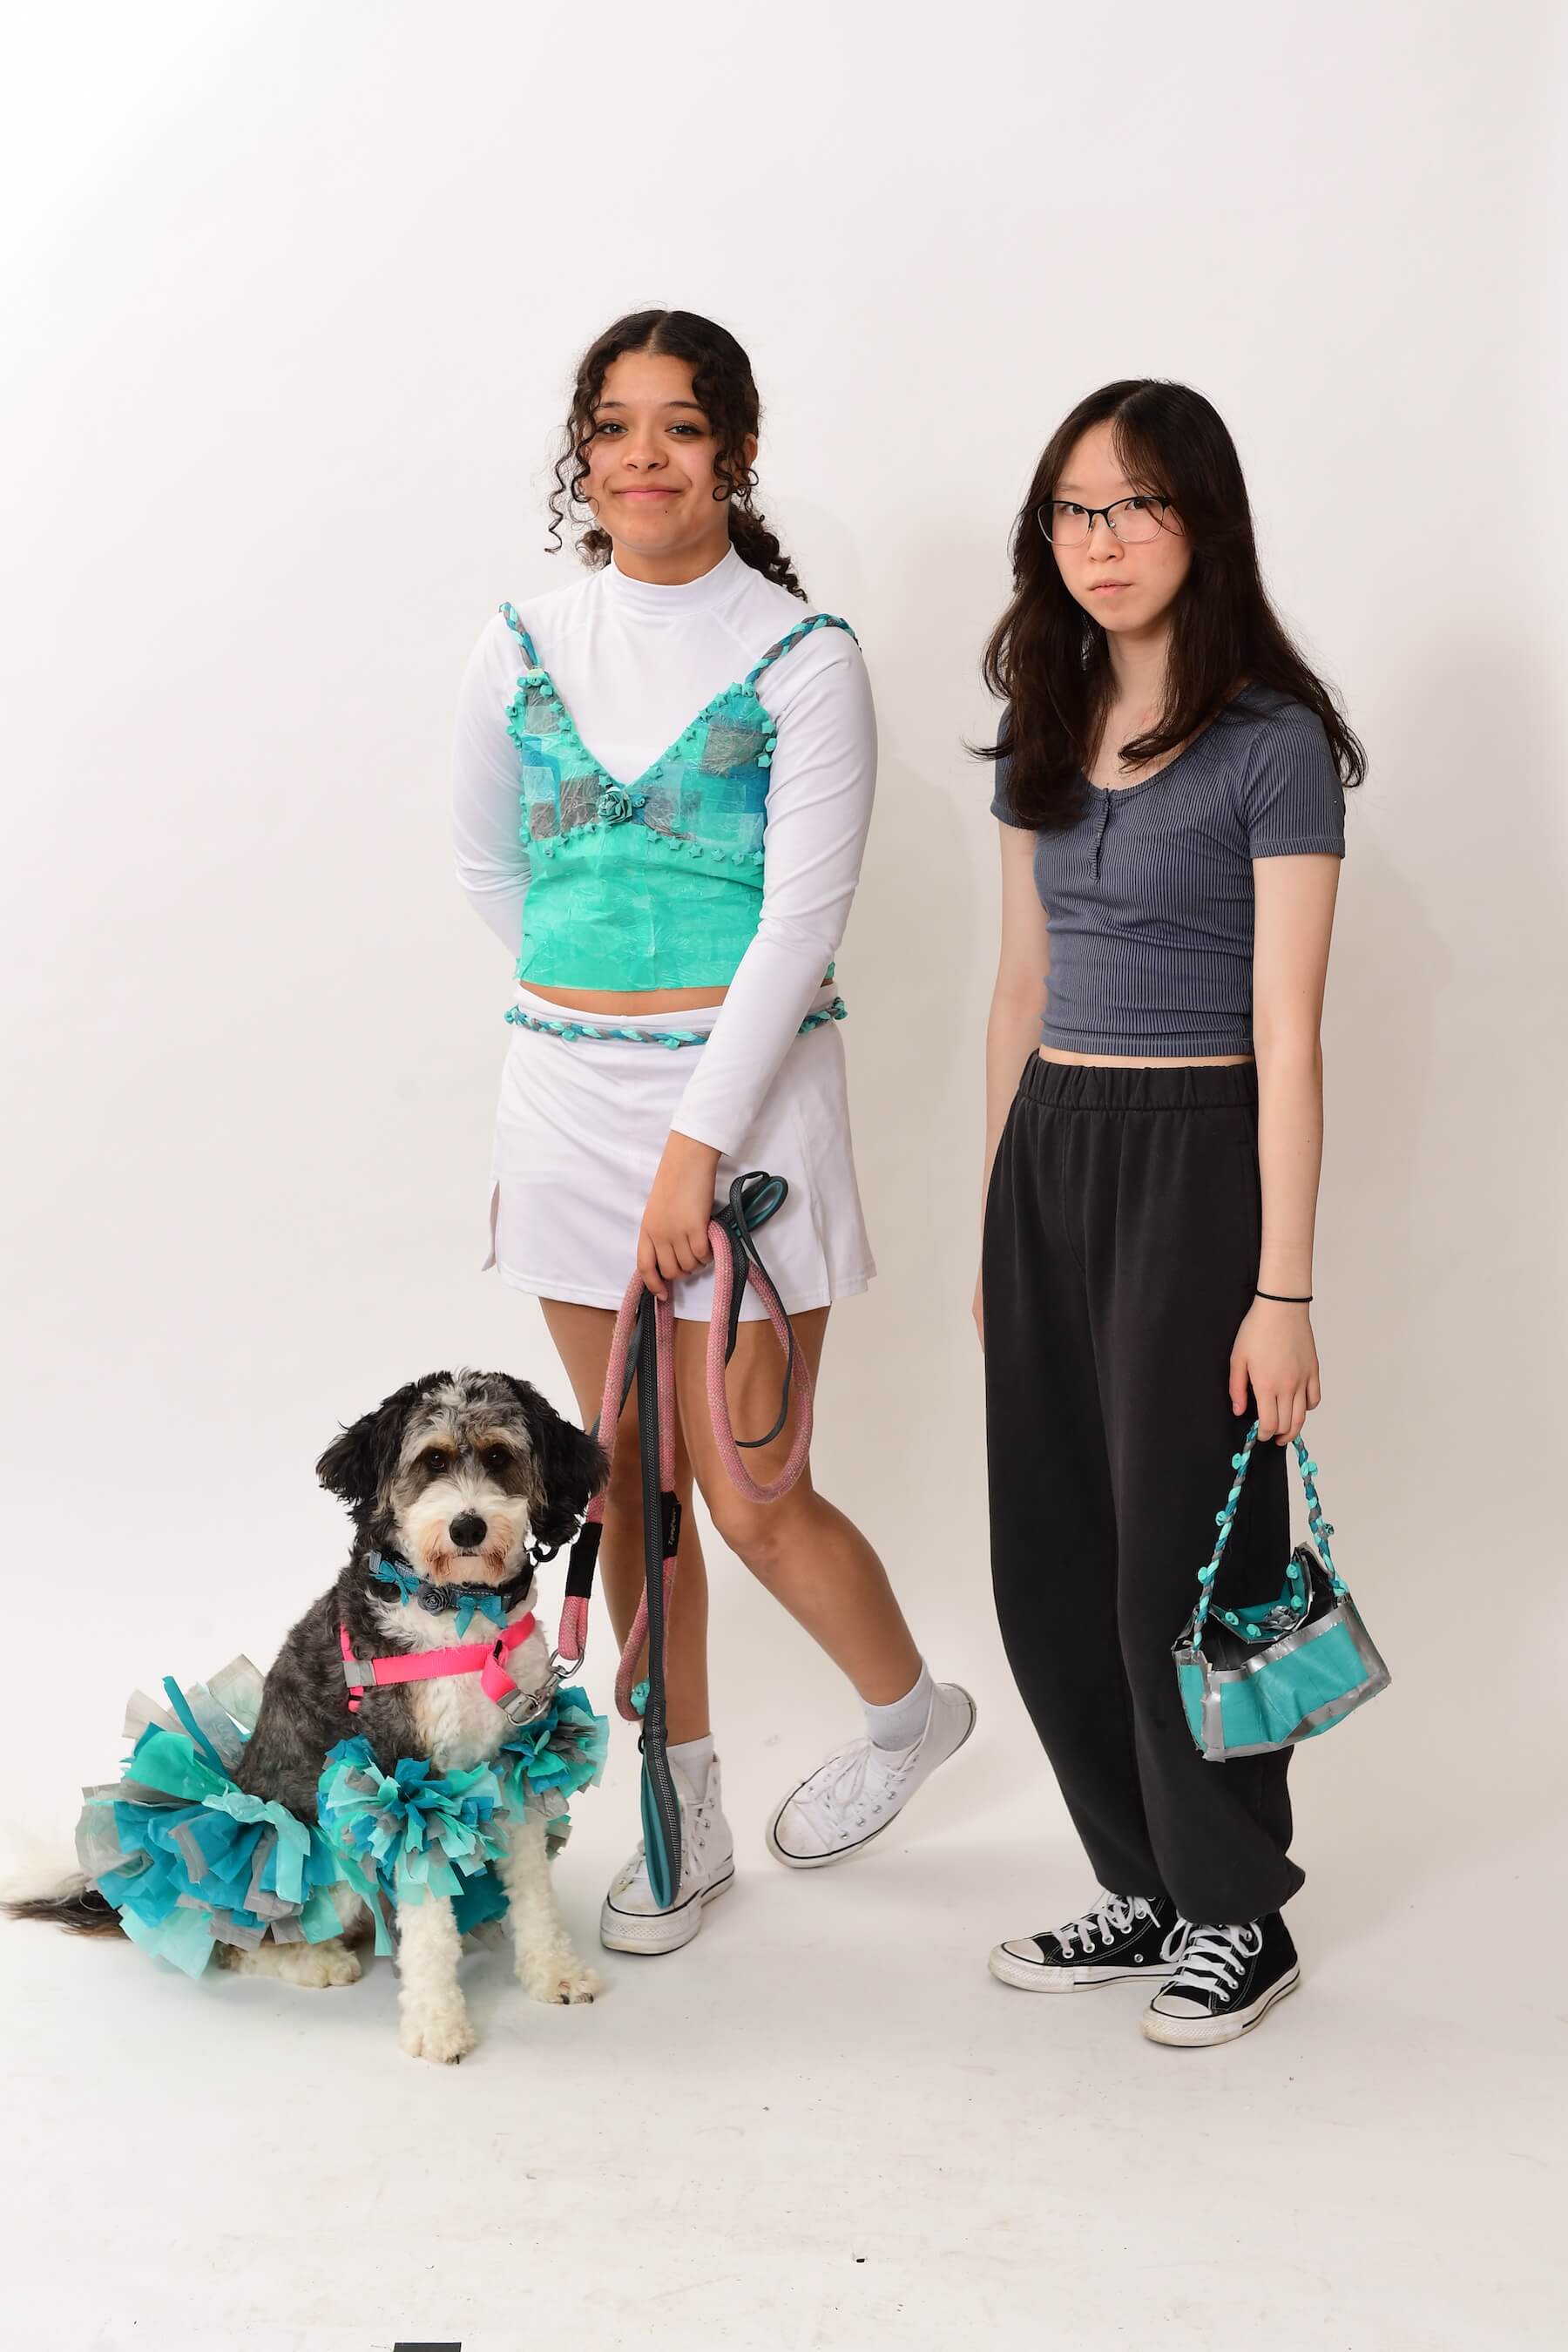 Two Ethical Culture Fieldston Upper School students and a dog model at the Fashion Show.